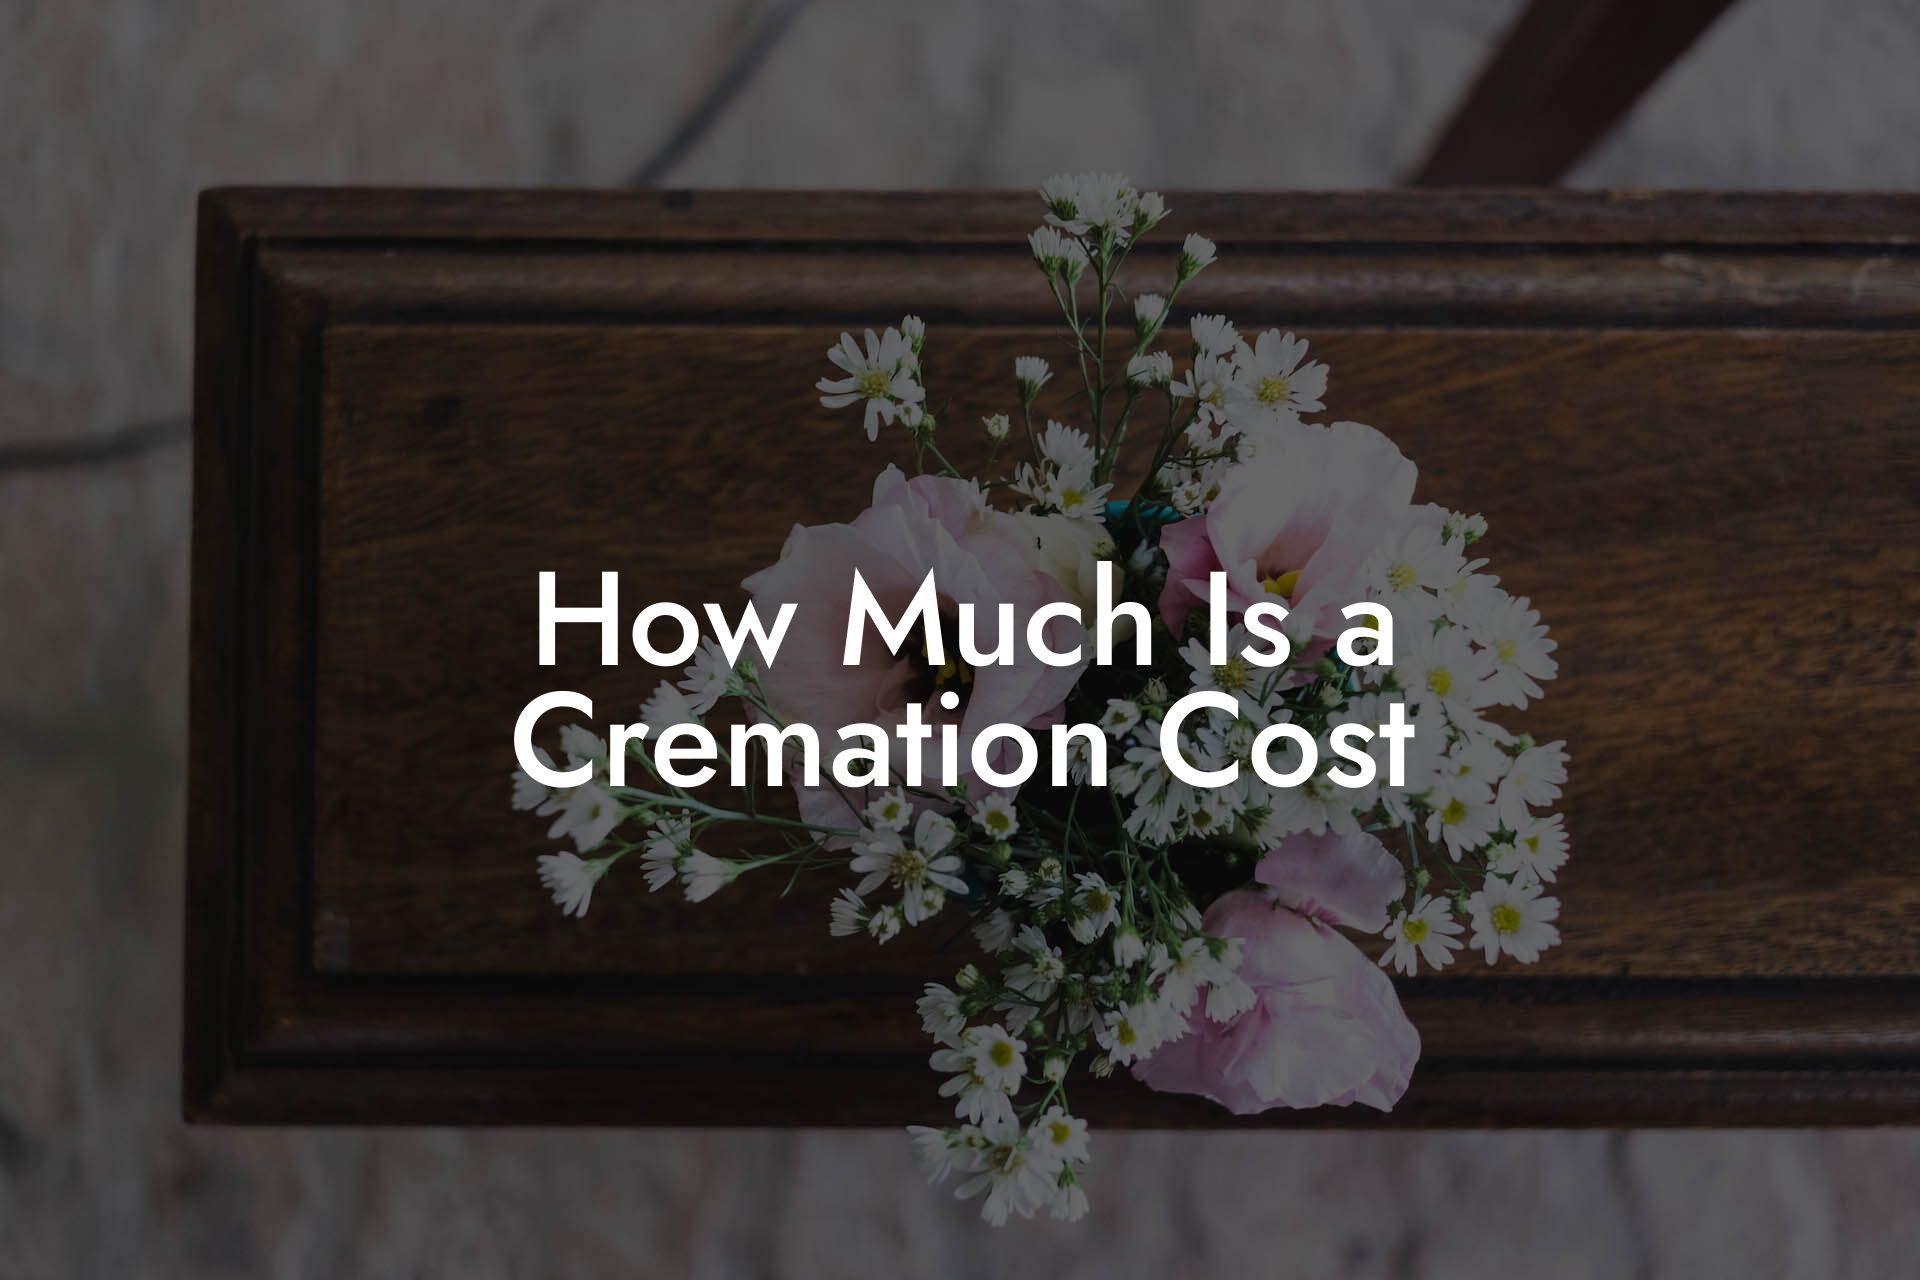 How Much Is a Cremation Cost